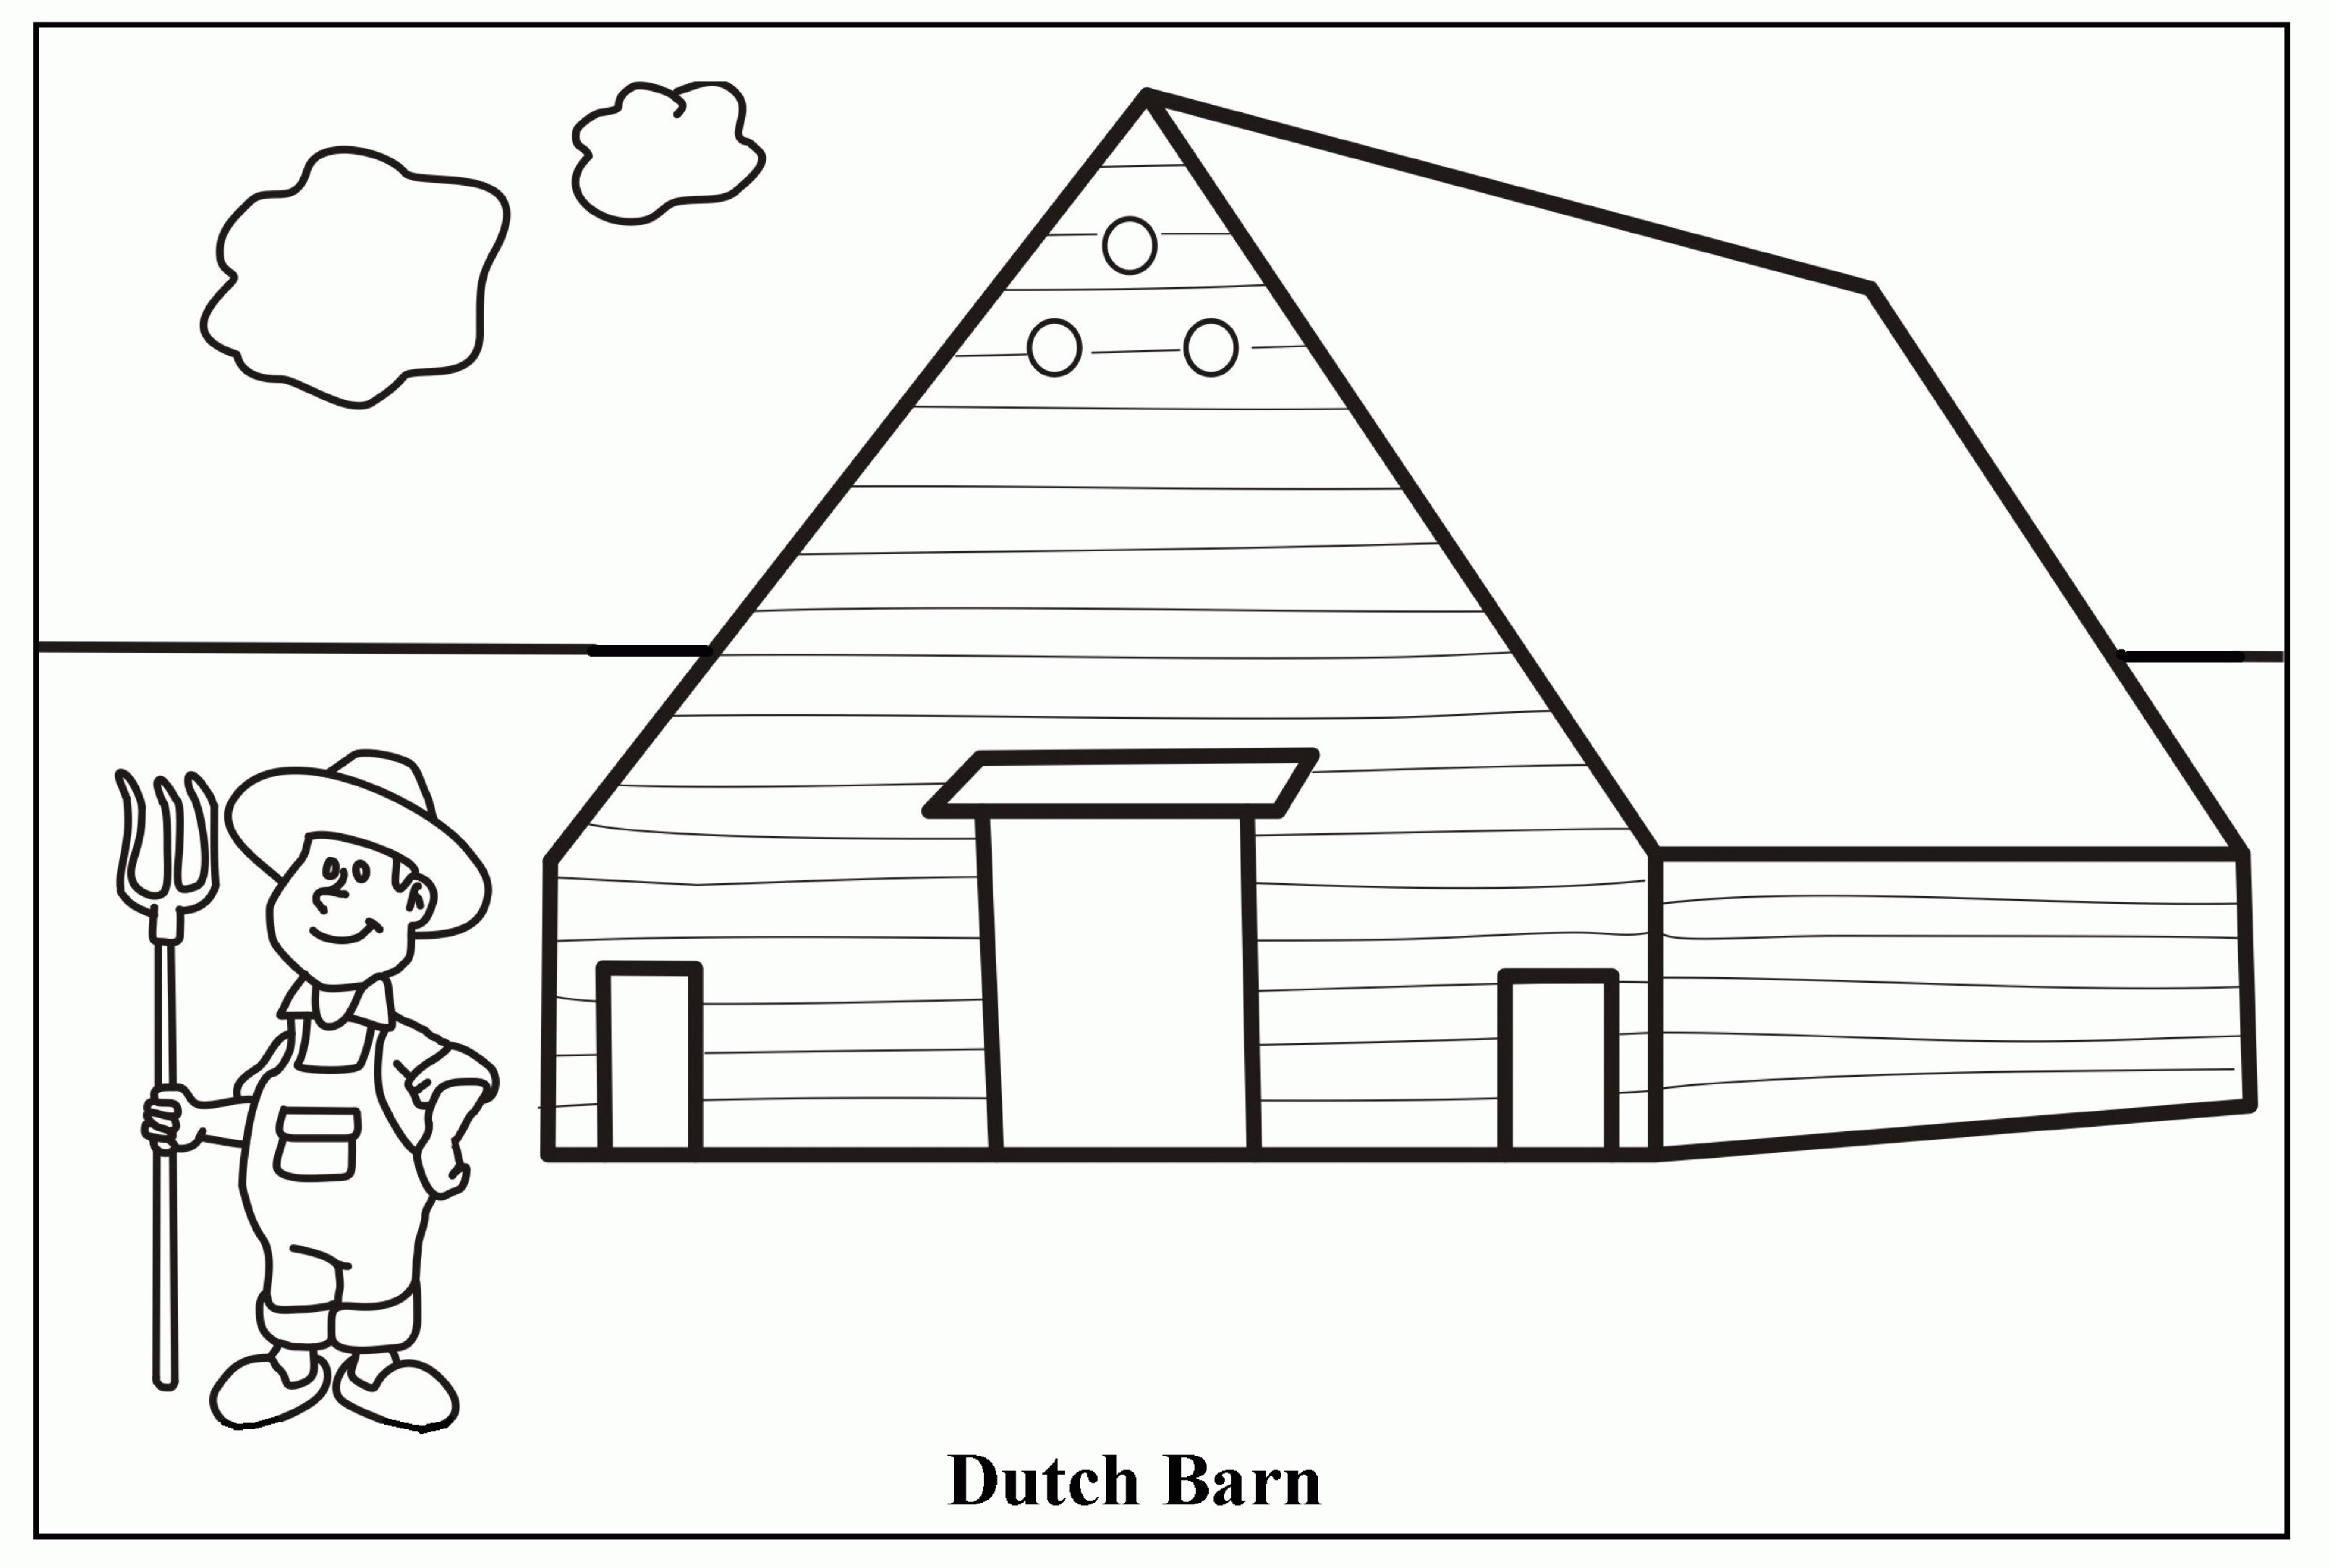 Coloring Page Barn - Coloring Page Photos - Coloring Home